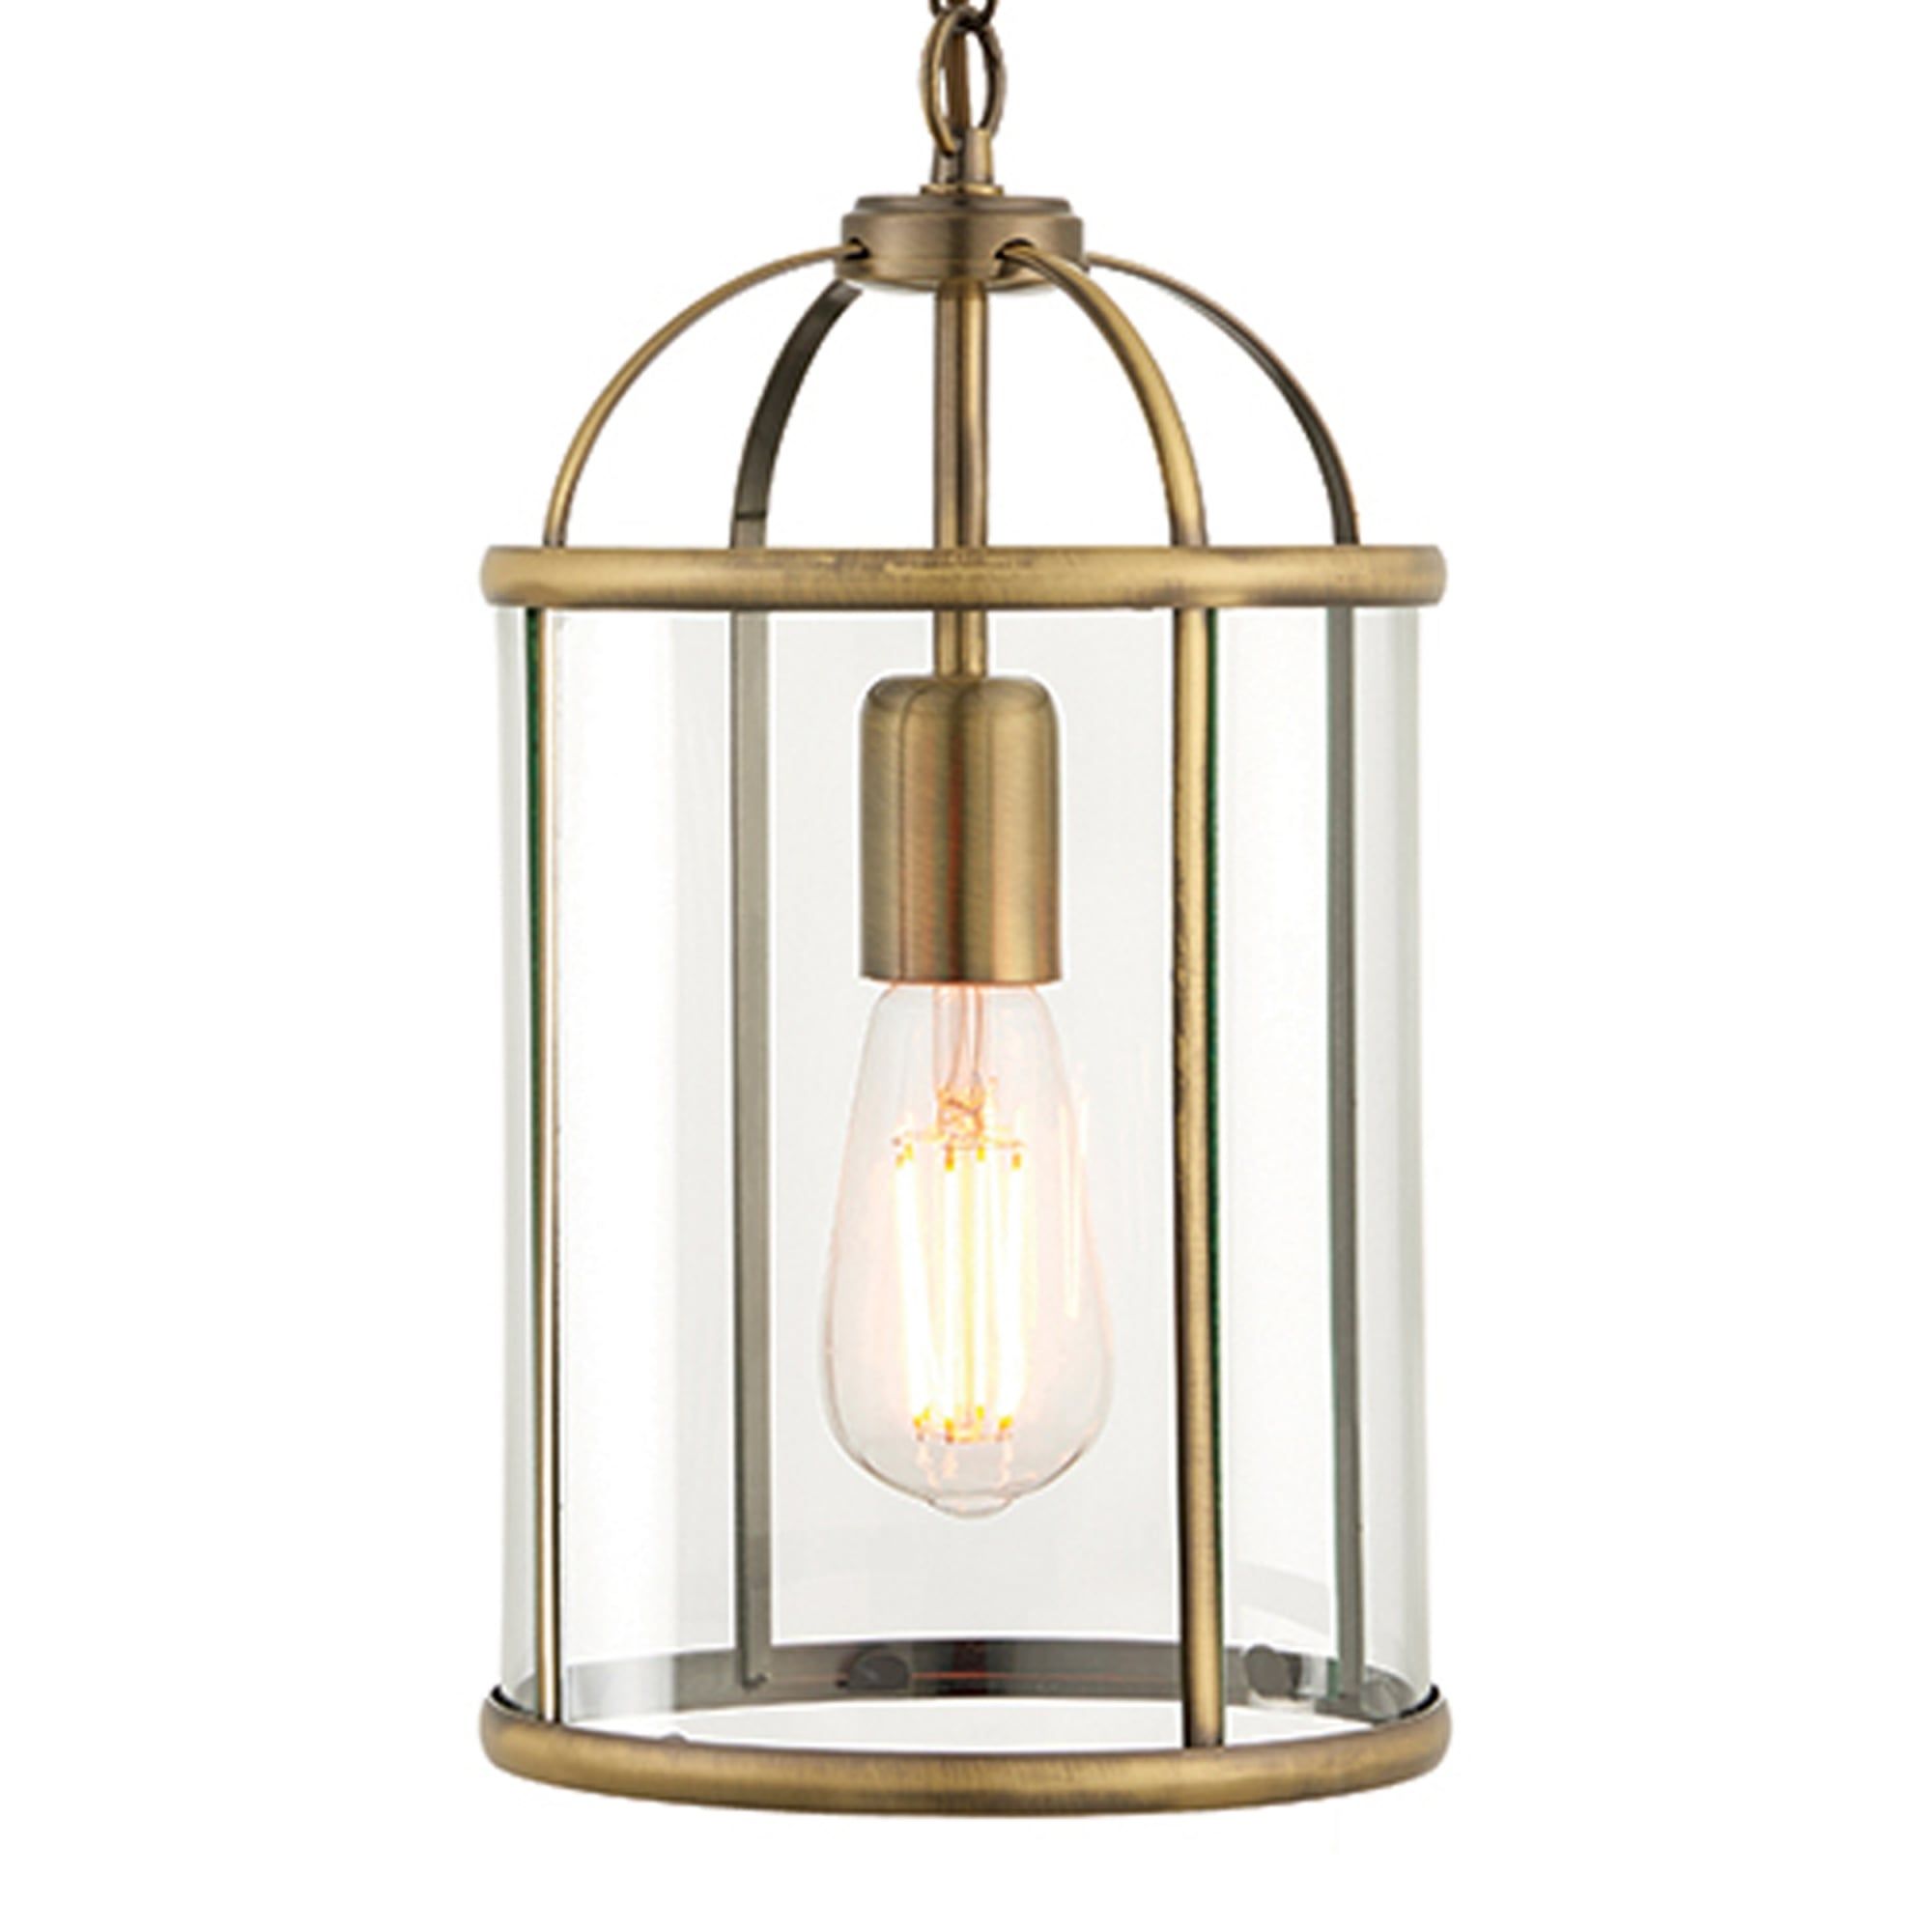 Endon 69454 Lambeth 1 Light Antique Brass And Glass Lantern Pendant In Aged Brass Lantern Chandeliers (View 6 of 15)